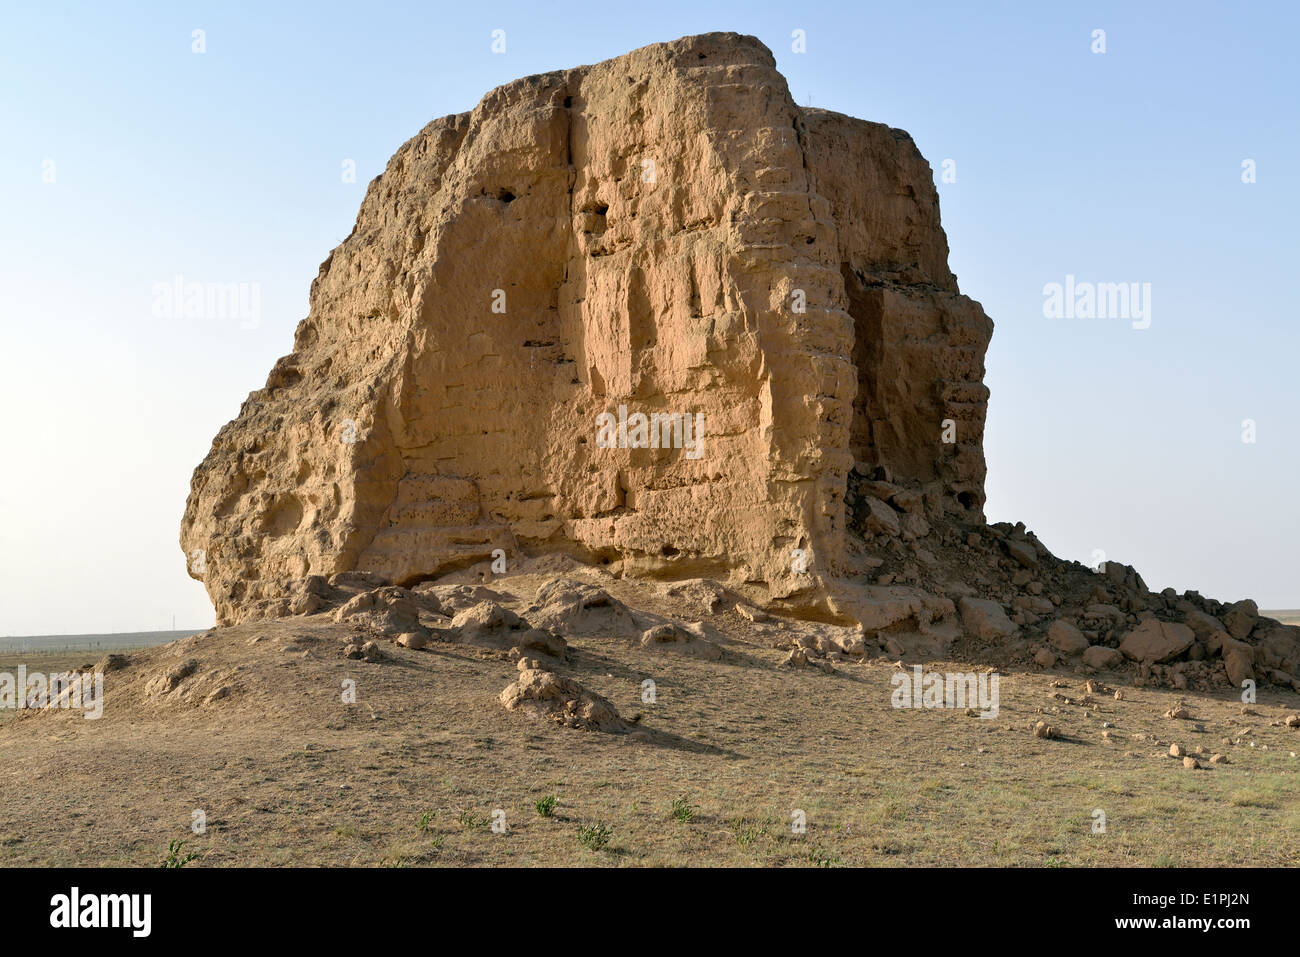 Beacon towers of Ming dynasty Great Wall in Yanchi, Ningxia, China. 2014 Stock Photo